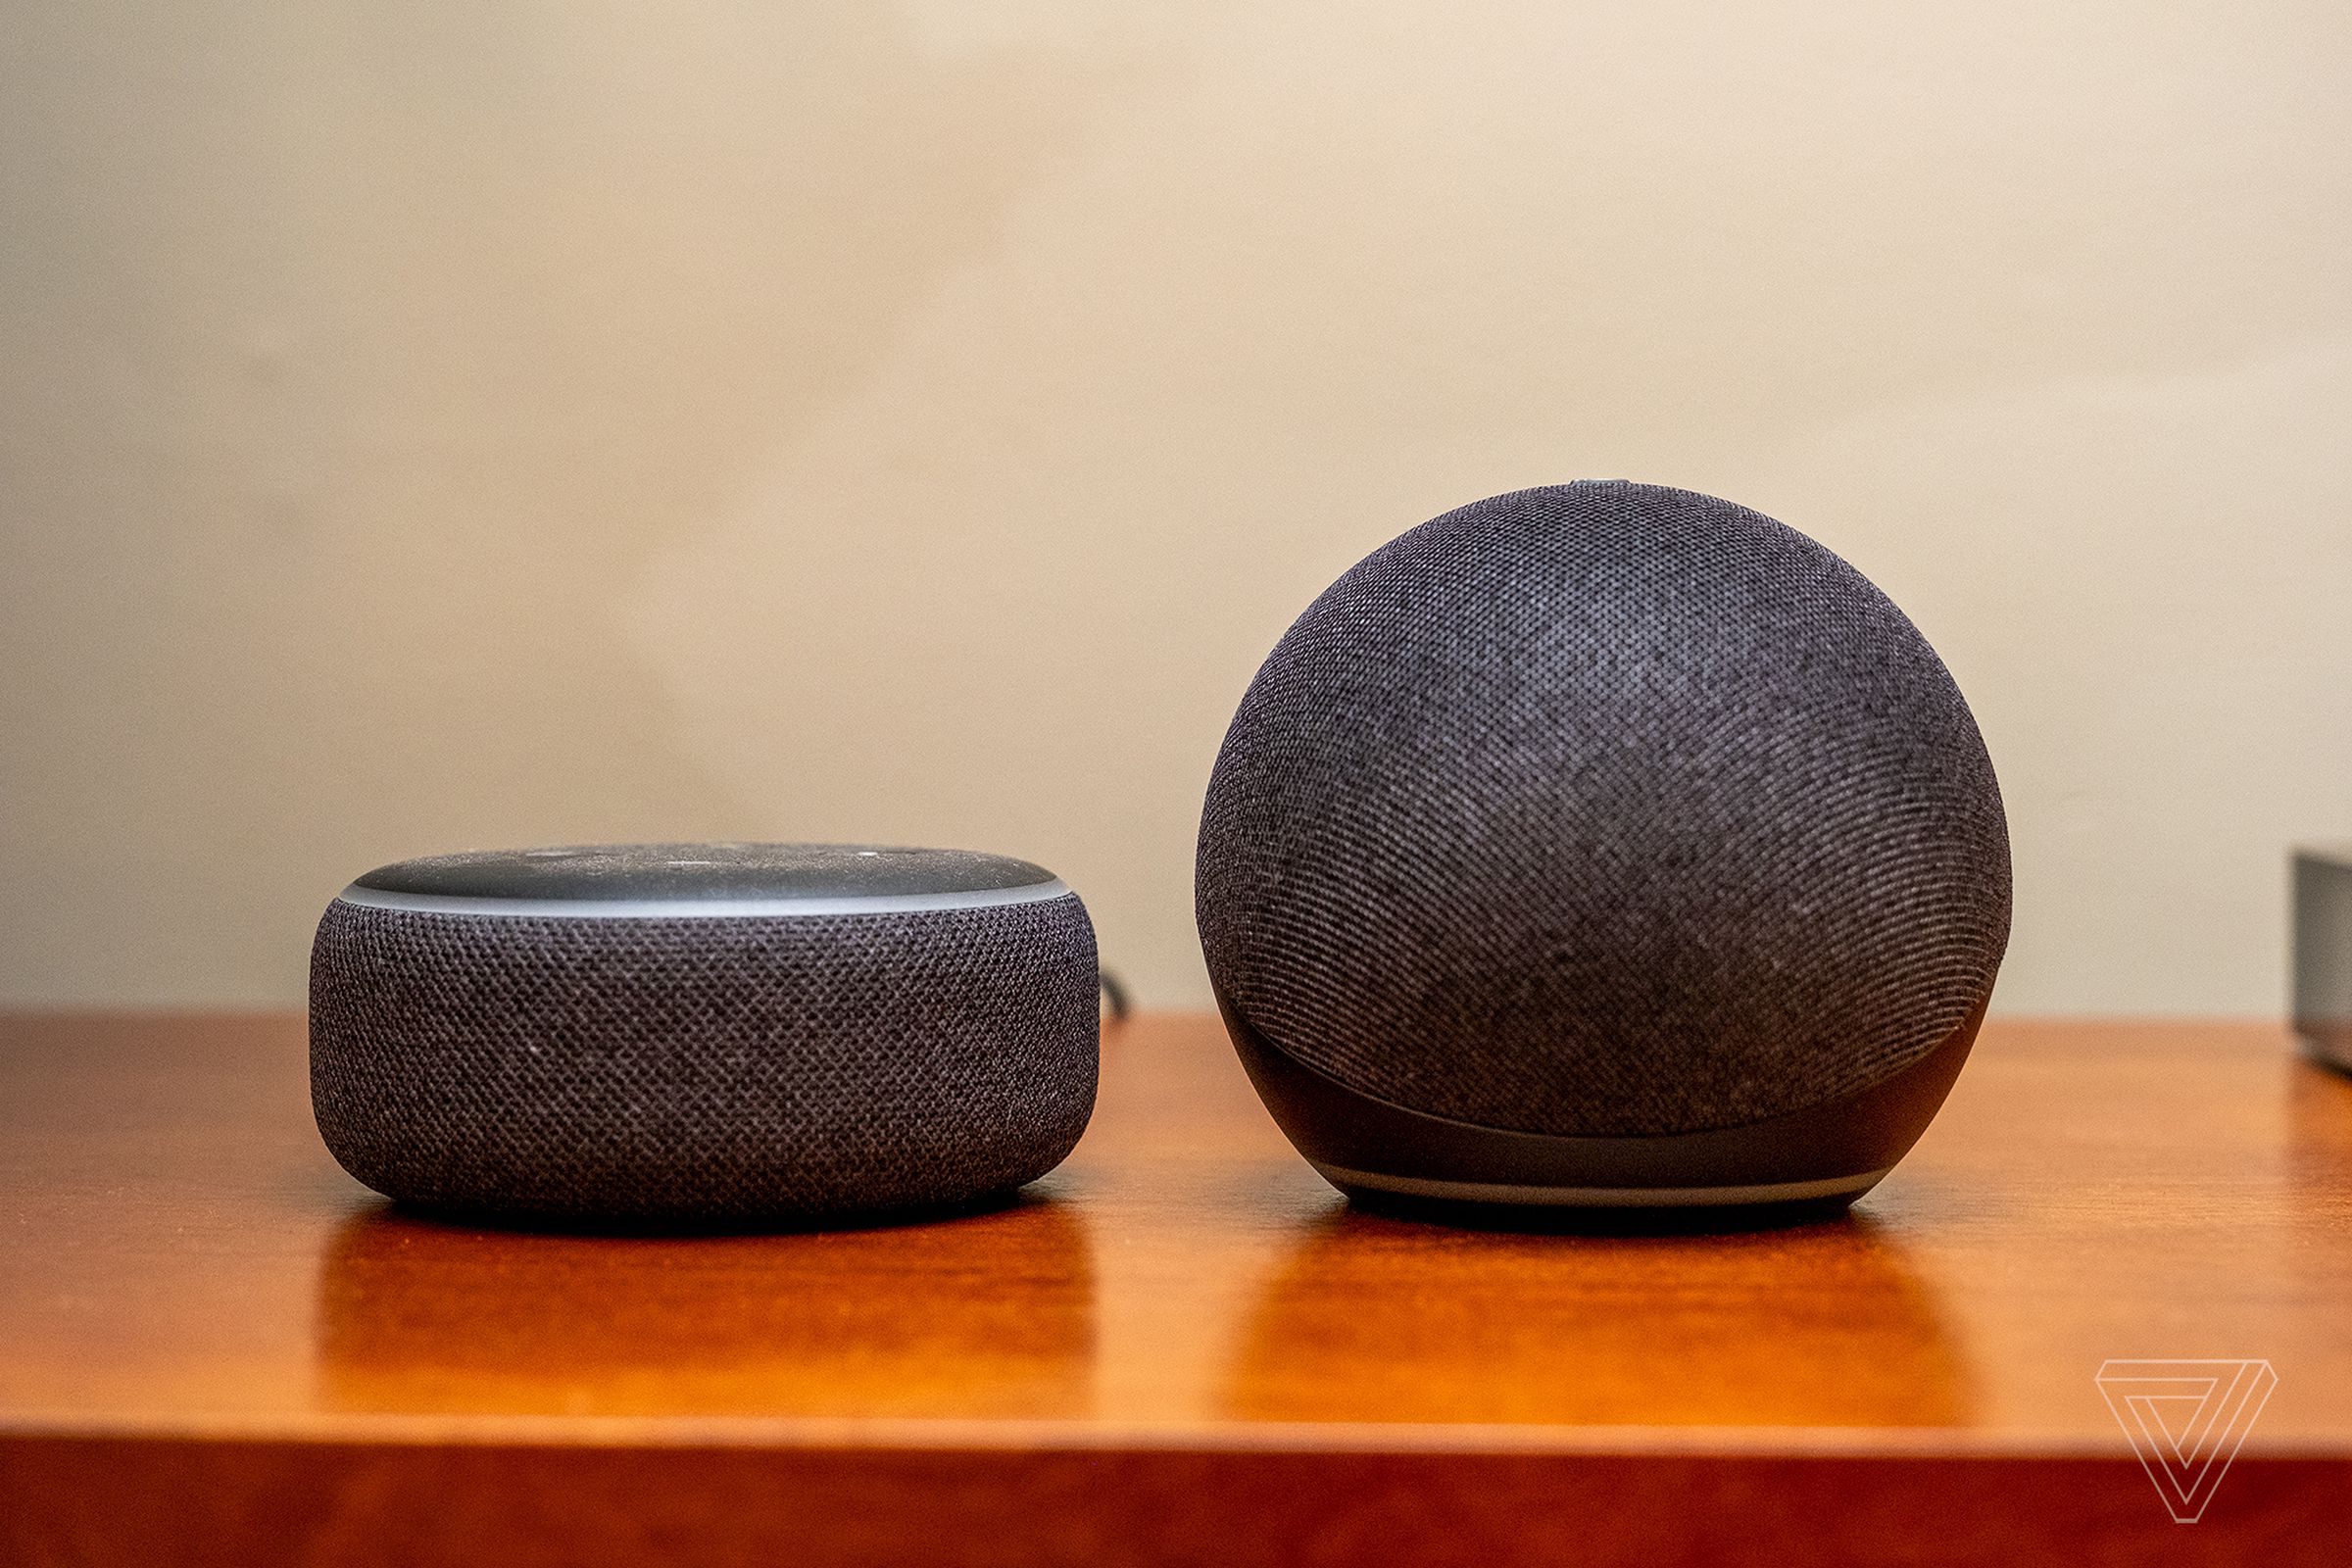 The spherical fourth-gen Echo Dot is larger than the puck-like third-gen.